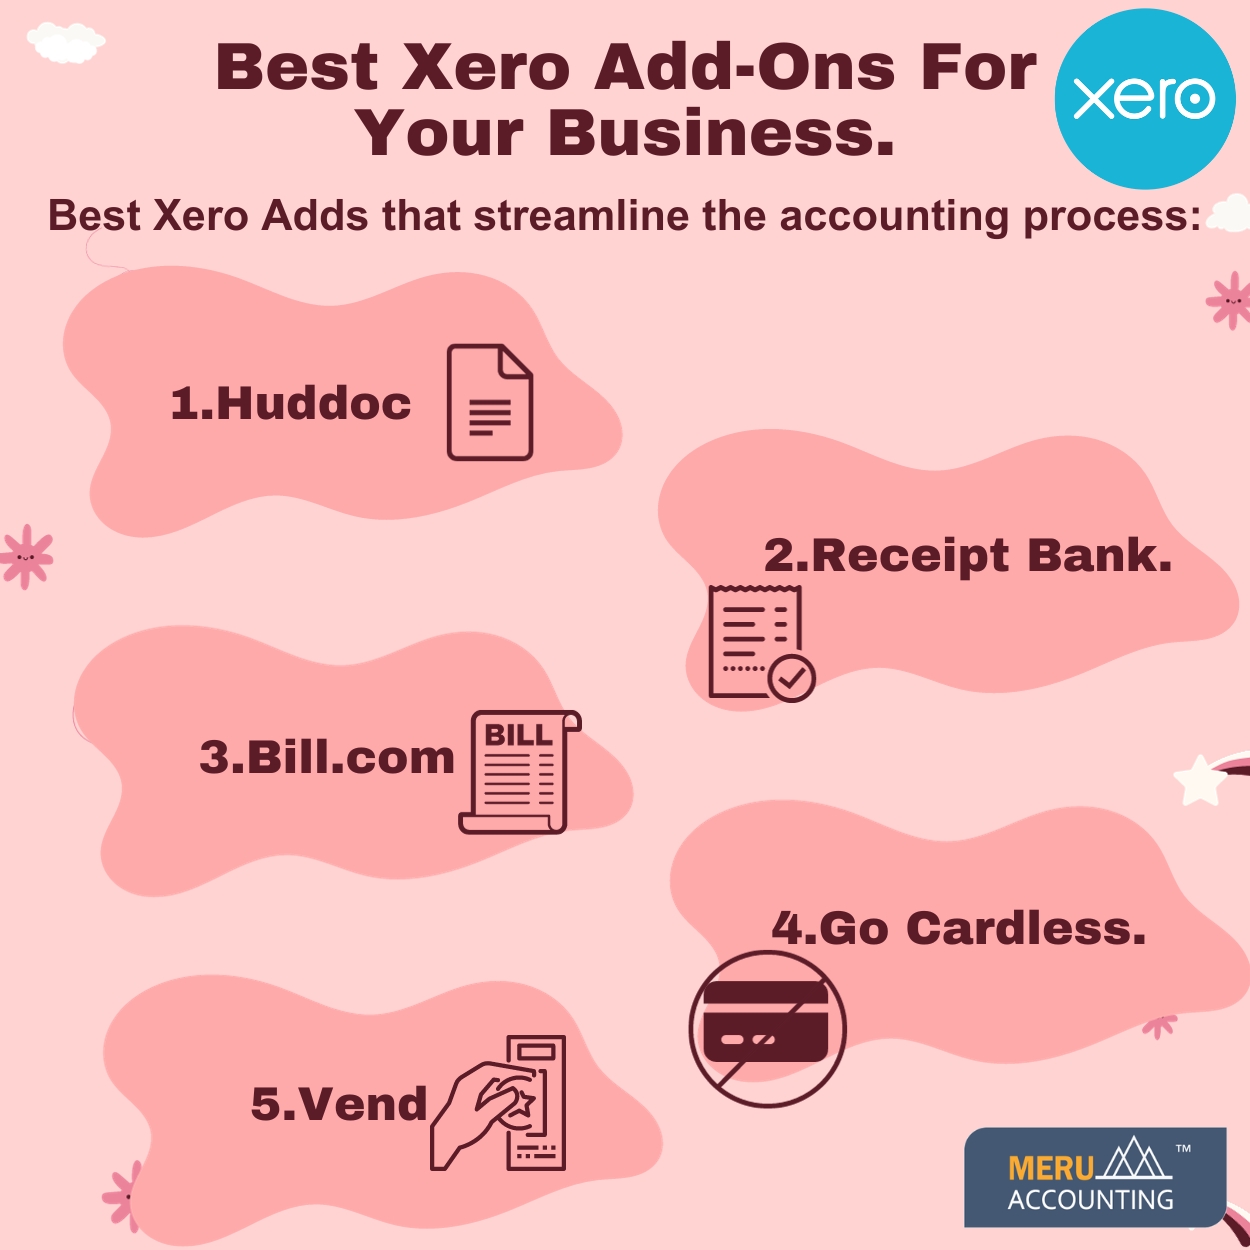 Kloe Best Xero Add Ons For Your Business Sr no.22 size 1250 by 1250 V1 2